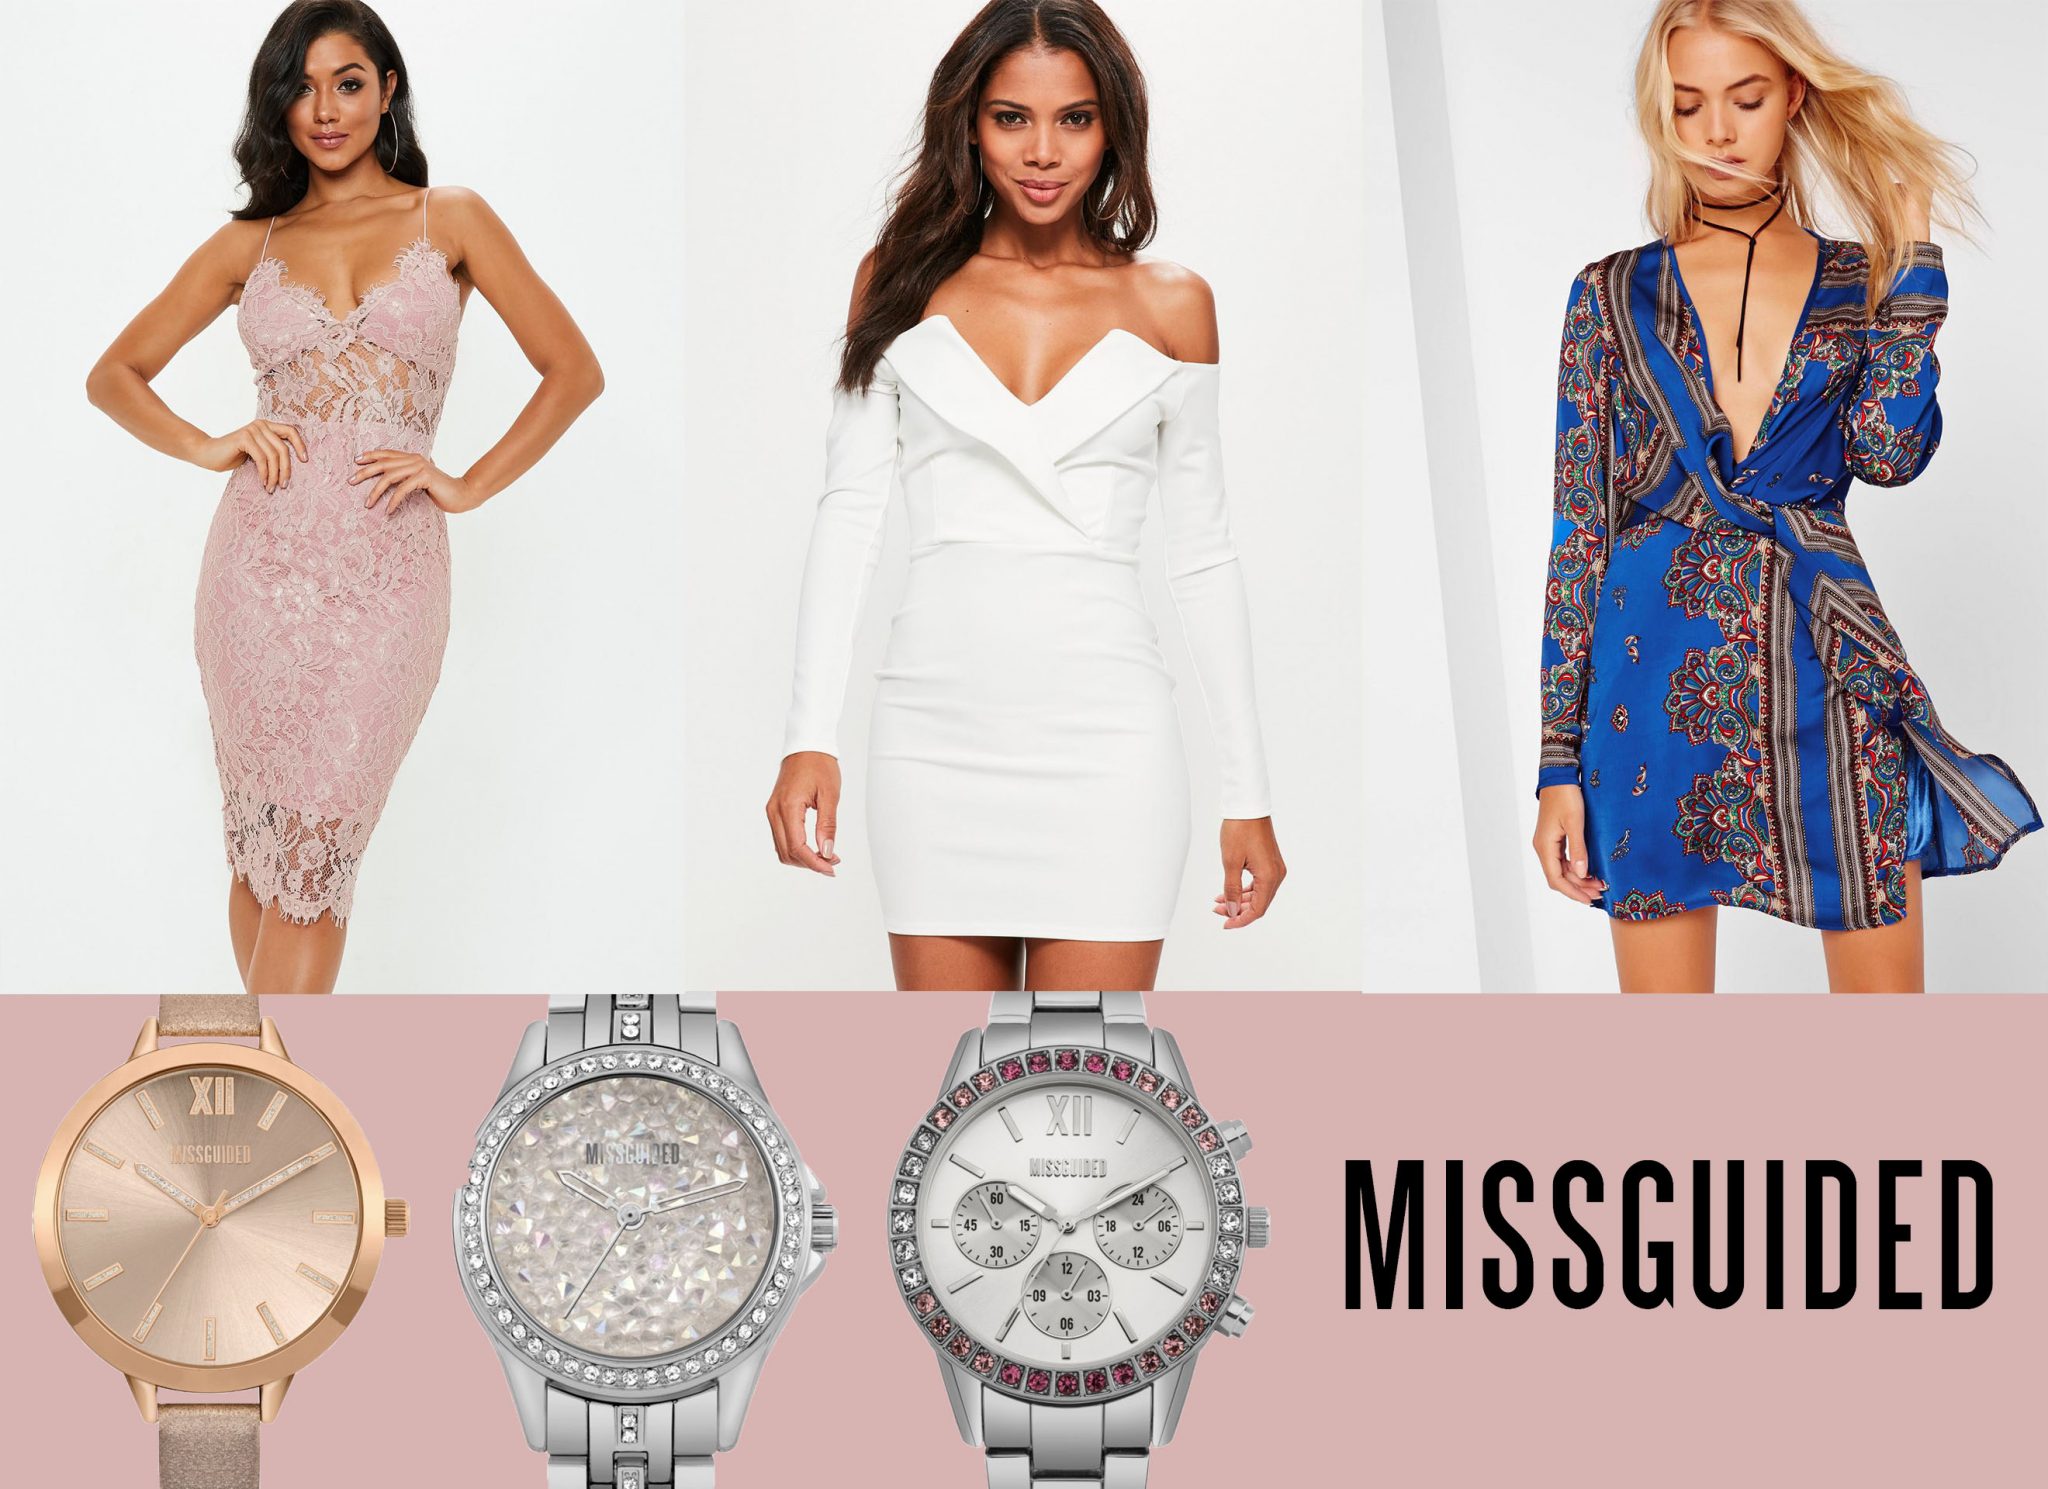 Missguided Lookbook: Watches, Shoes and Dresses